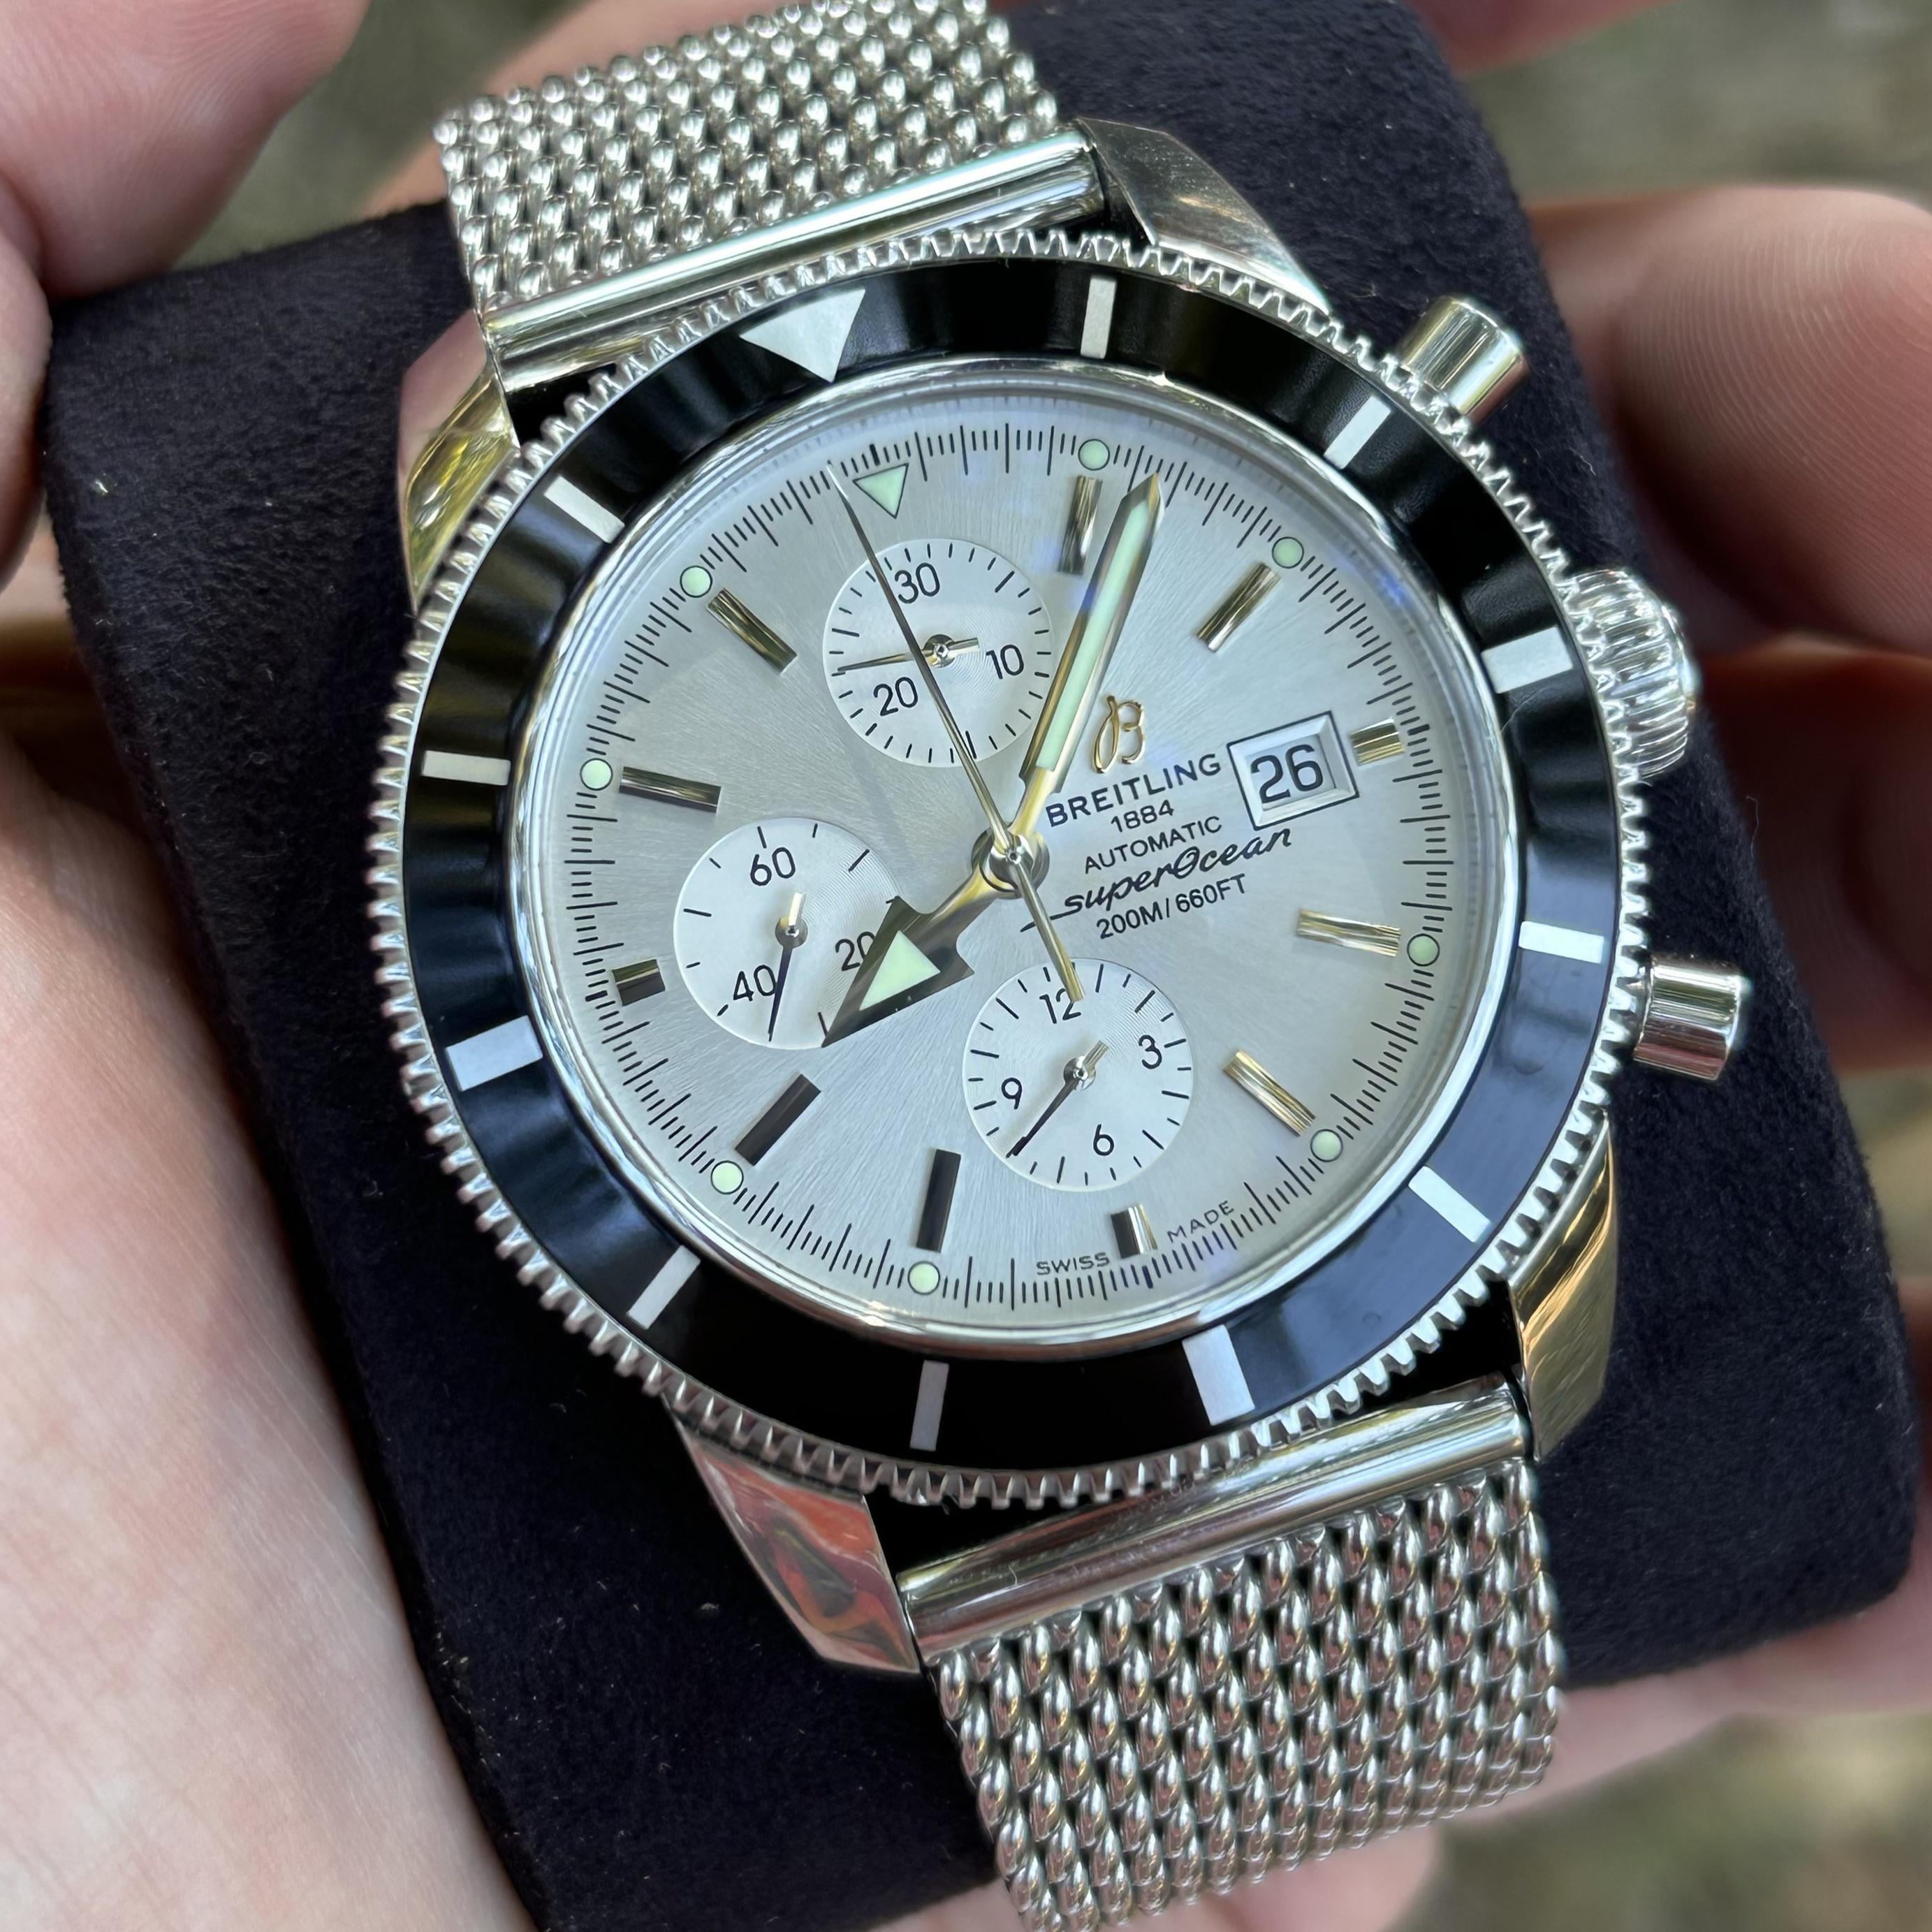 Breitling SuperOcean Heritage Chrono 46 Chronograph Watch A13320